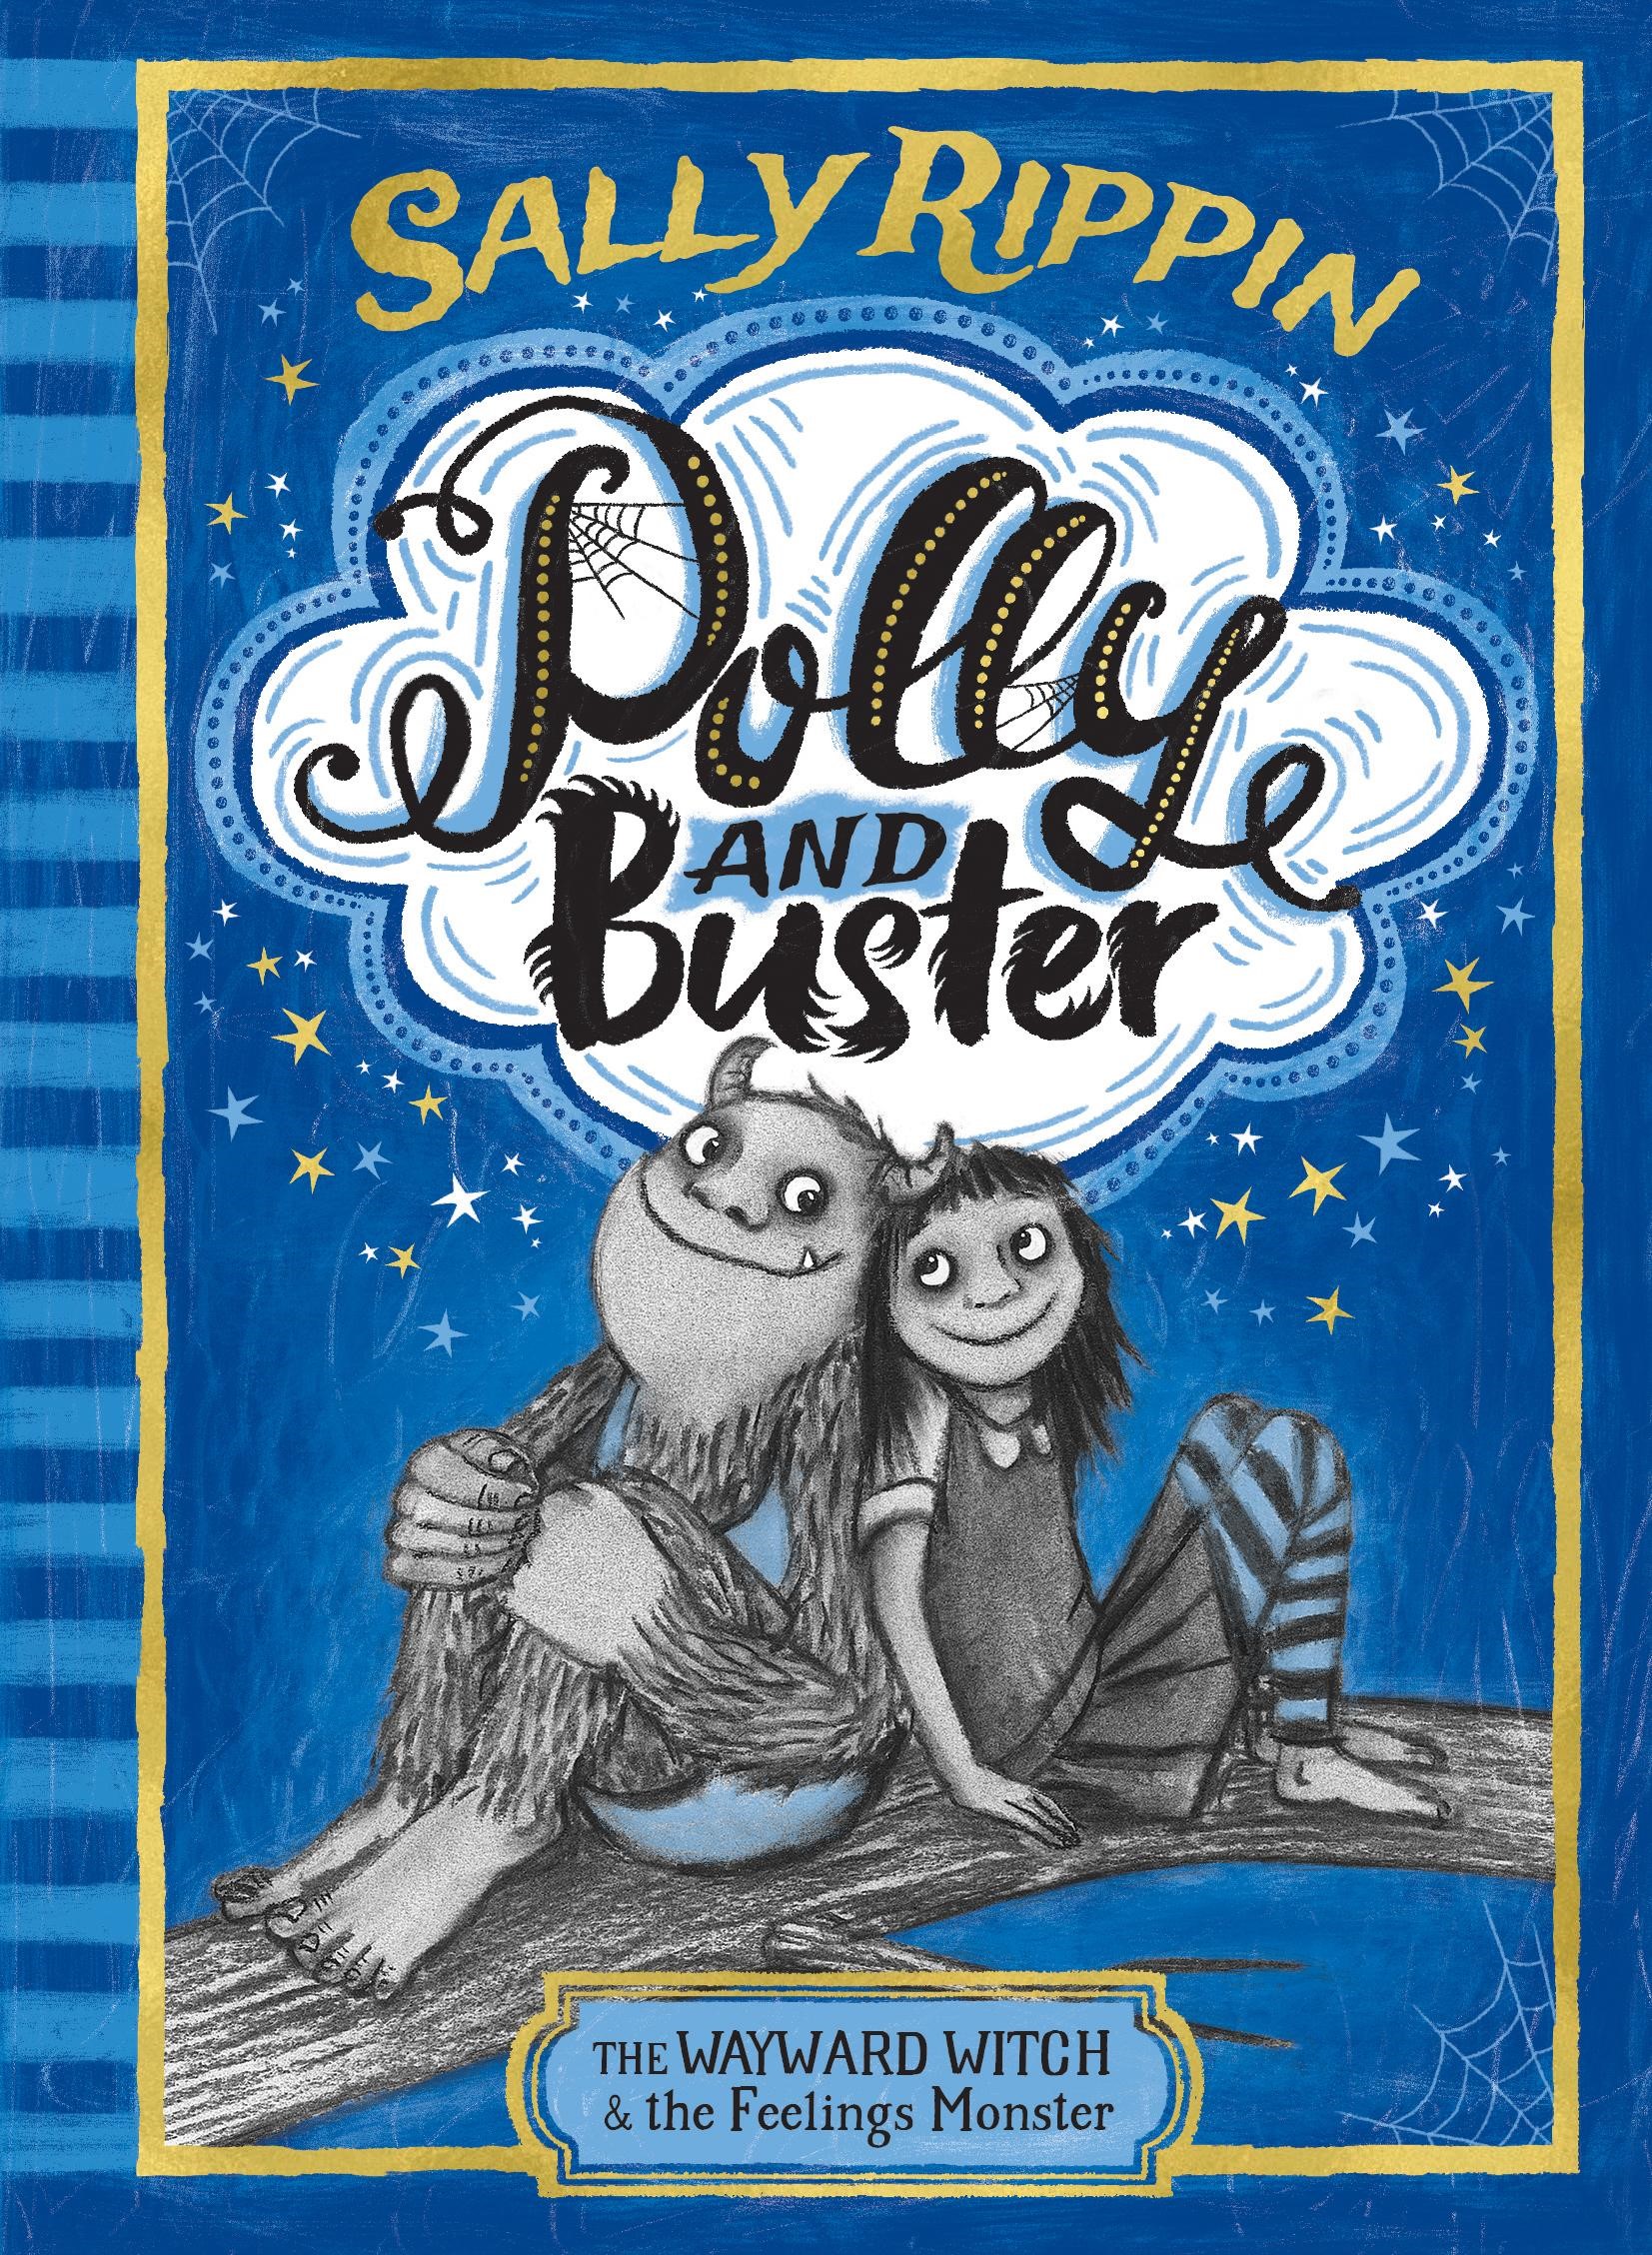 Book cover: Polly and Buster by Sally Rippin